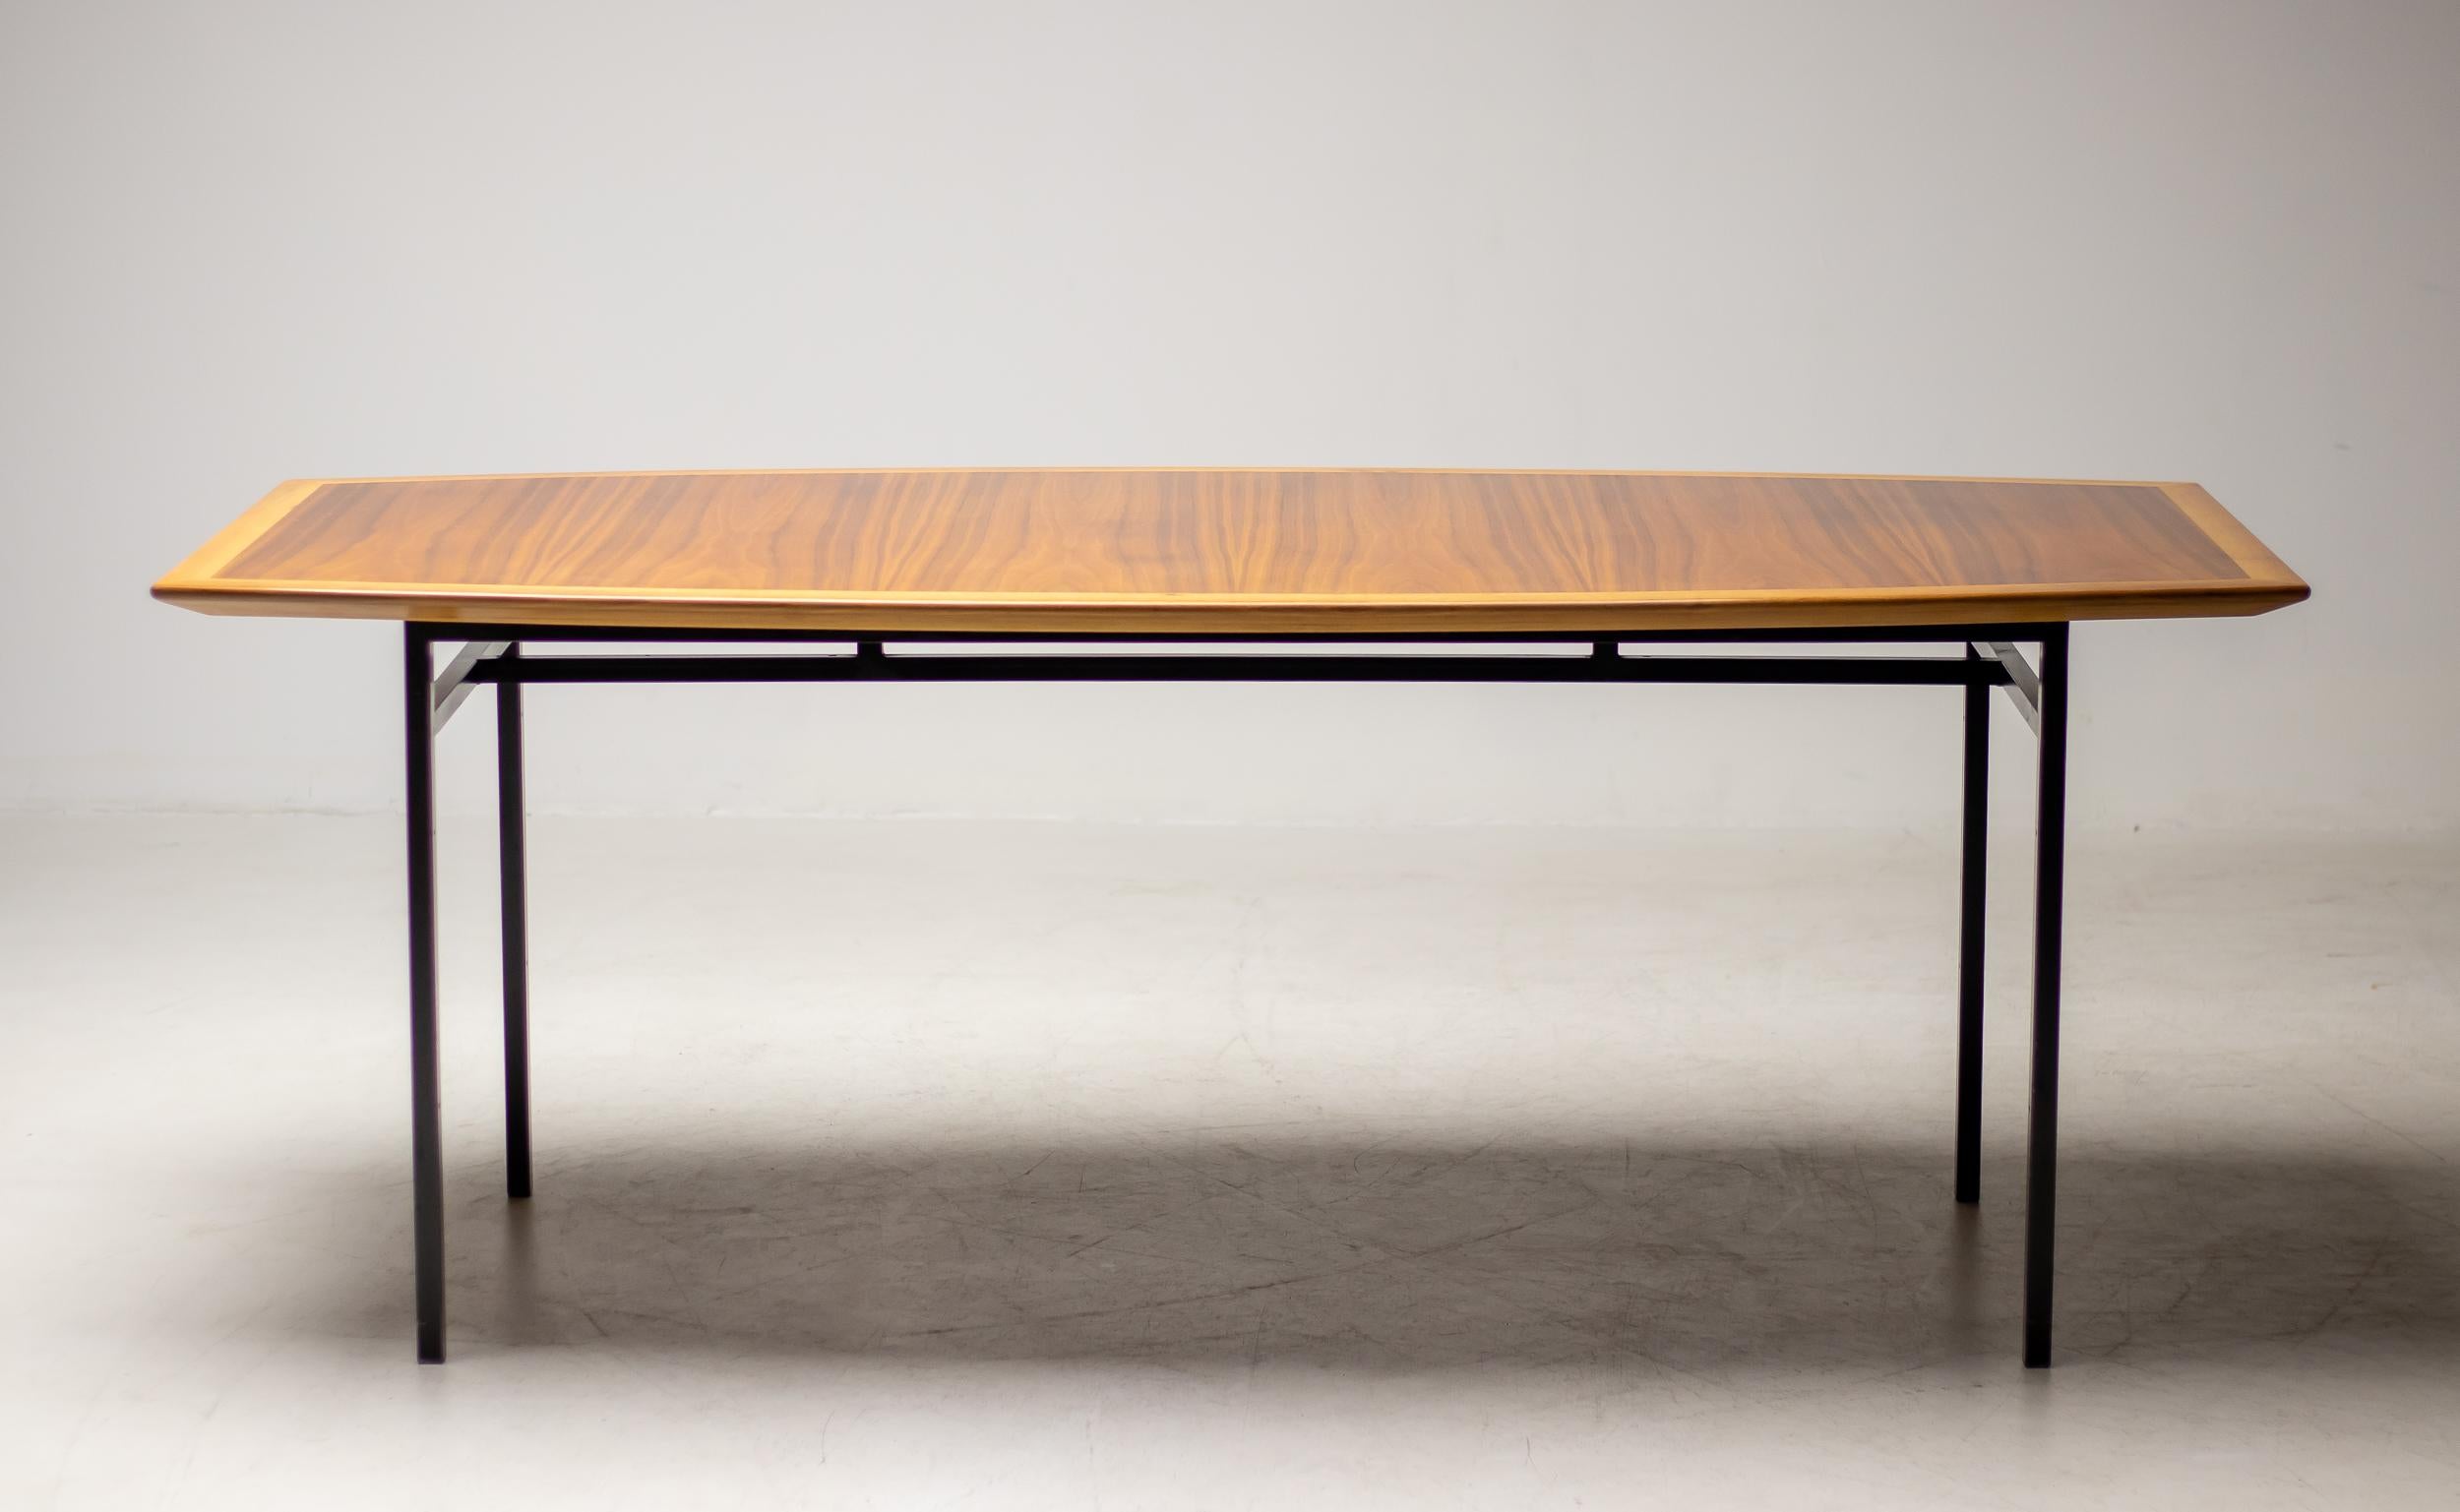 Florence Knoll model 578 dining or conference table.
The table features a boat shaped top in walnut with an enameled square tubular steel base.
The beautiful book matched walnut table top features a contrasting beveled edge.
Marked with label, made